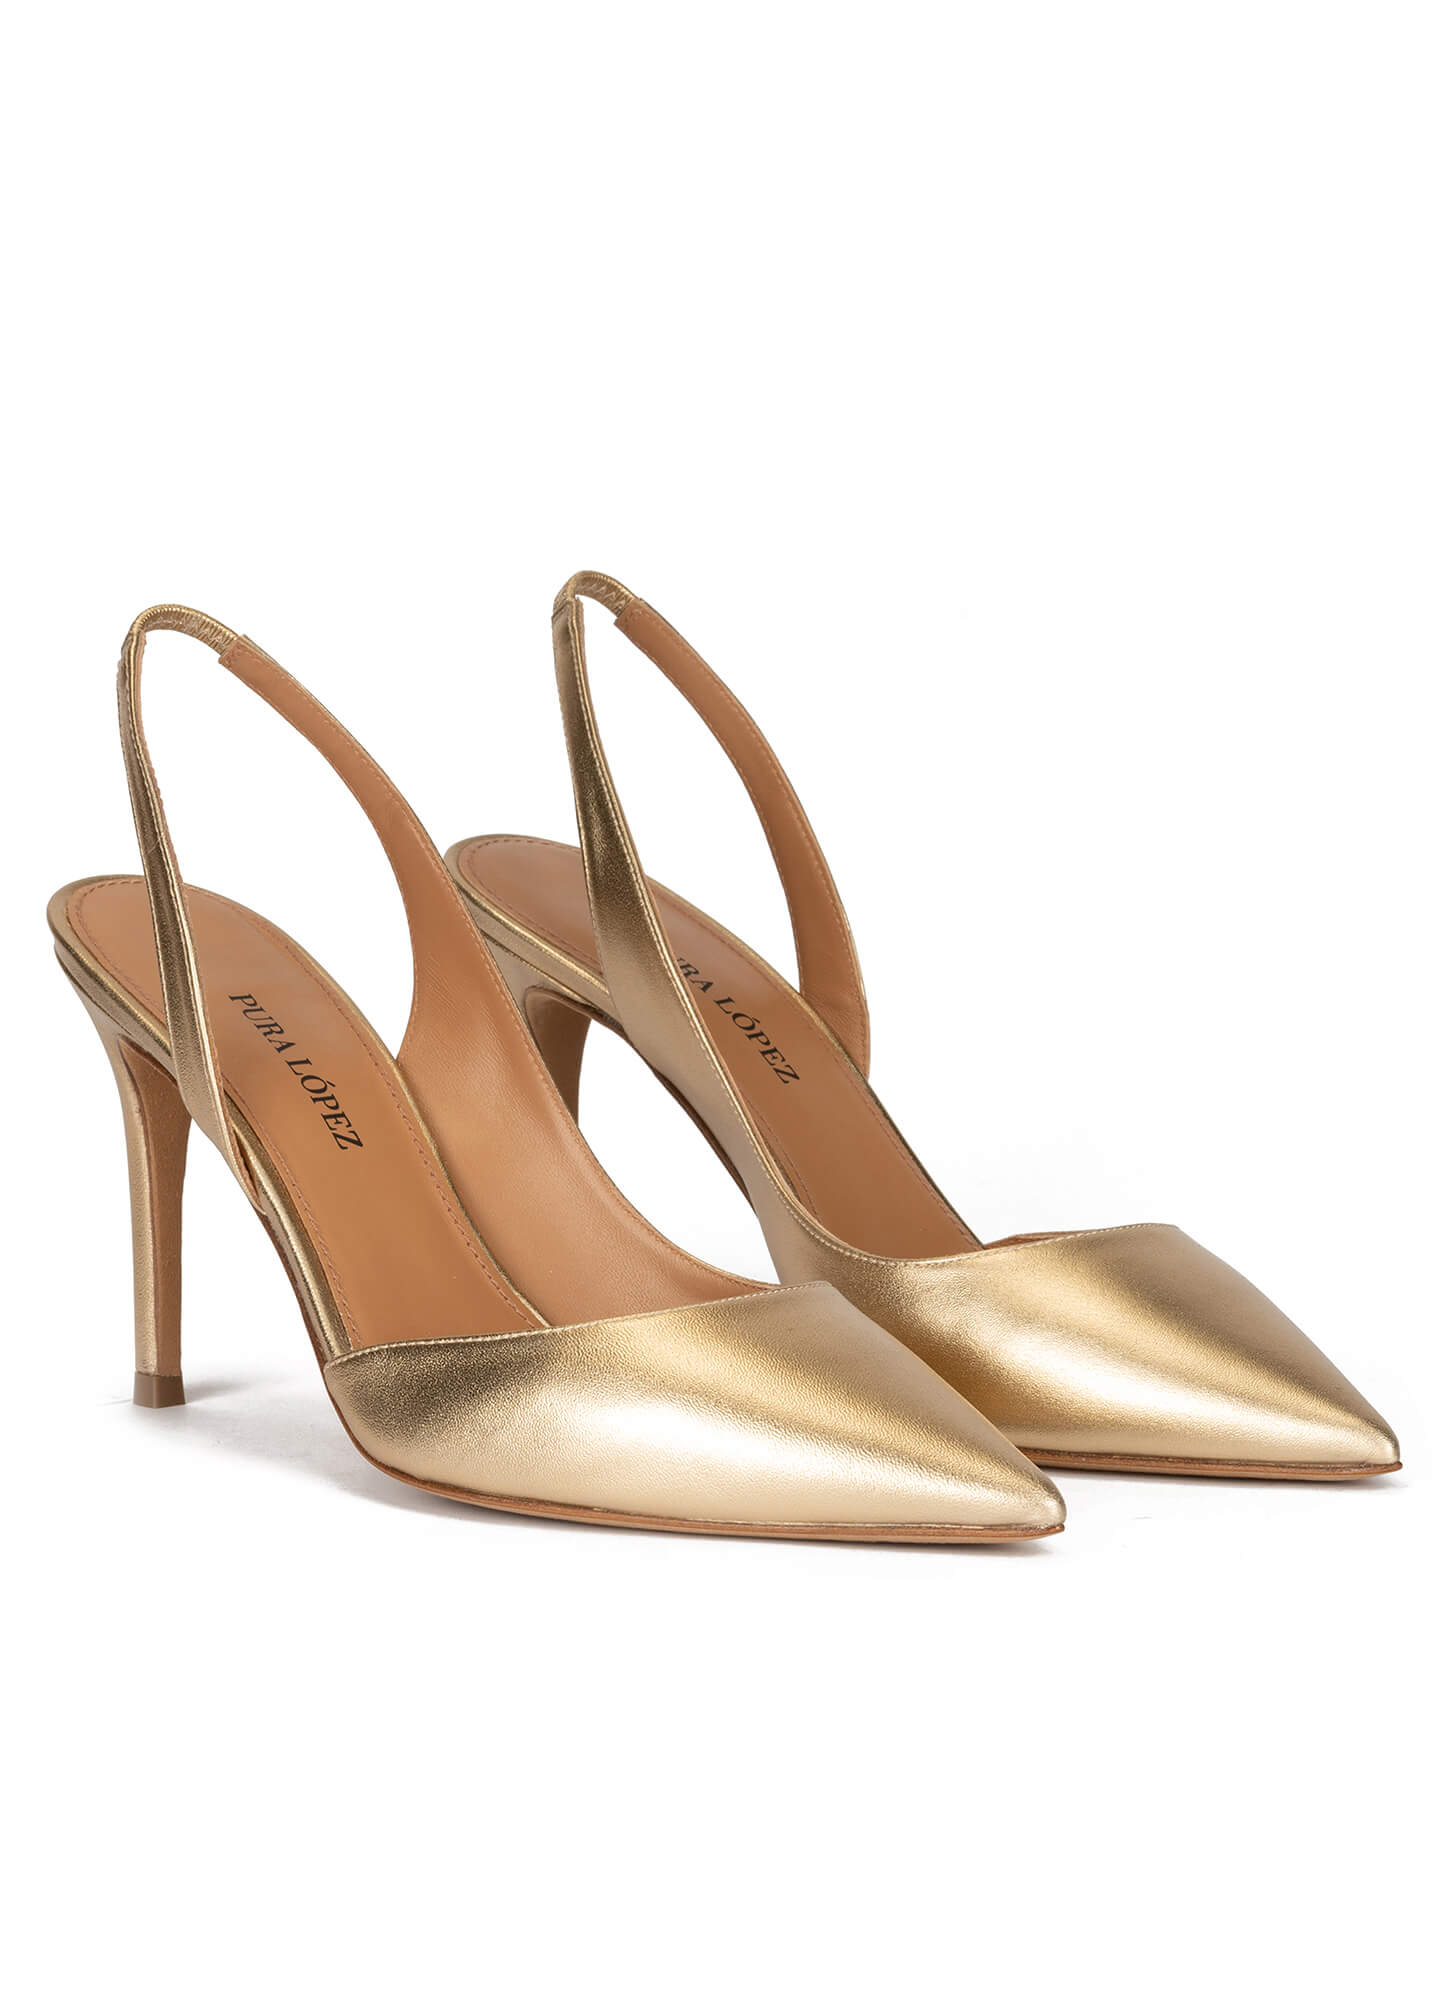 Golden Slingback Pointy Toe Pumps With 90mm Stiletto Heel Pura Lopez